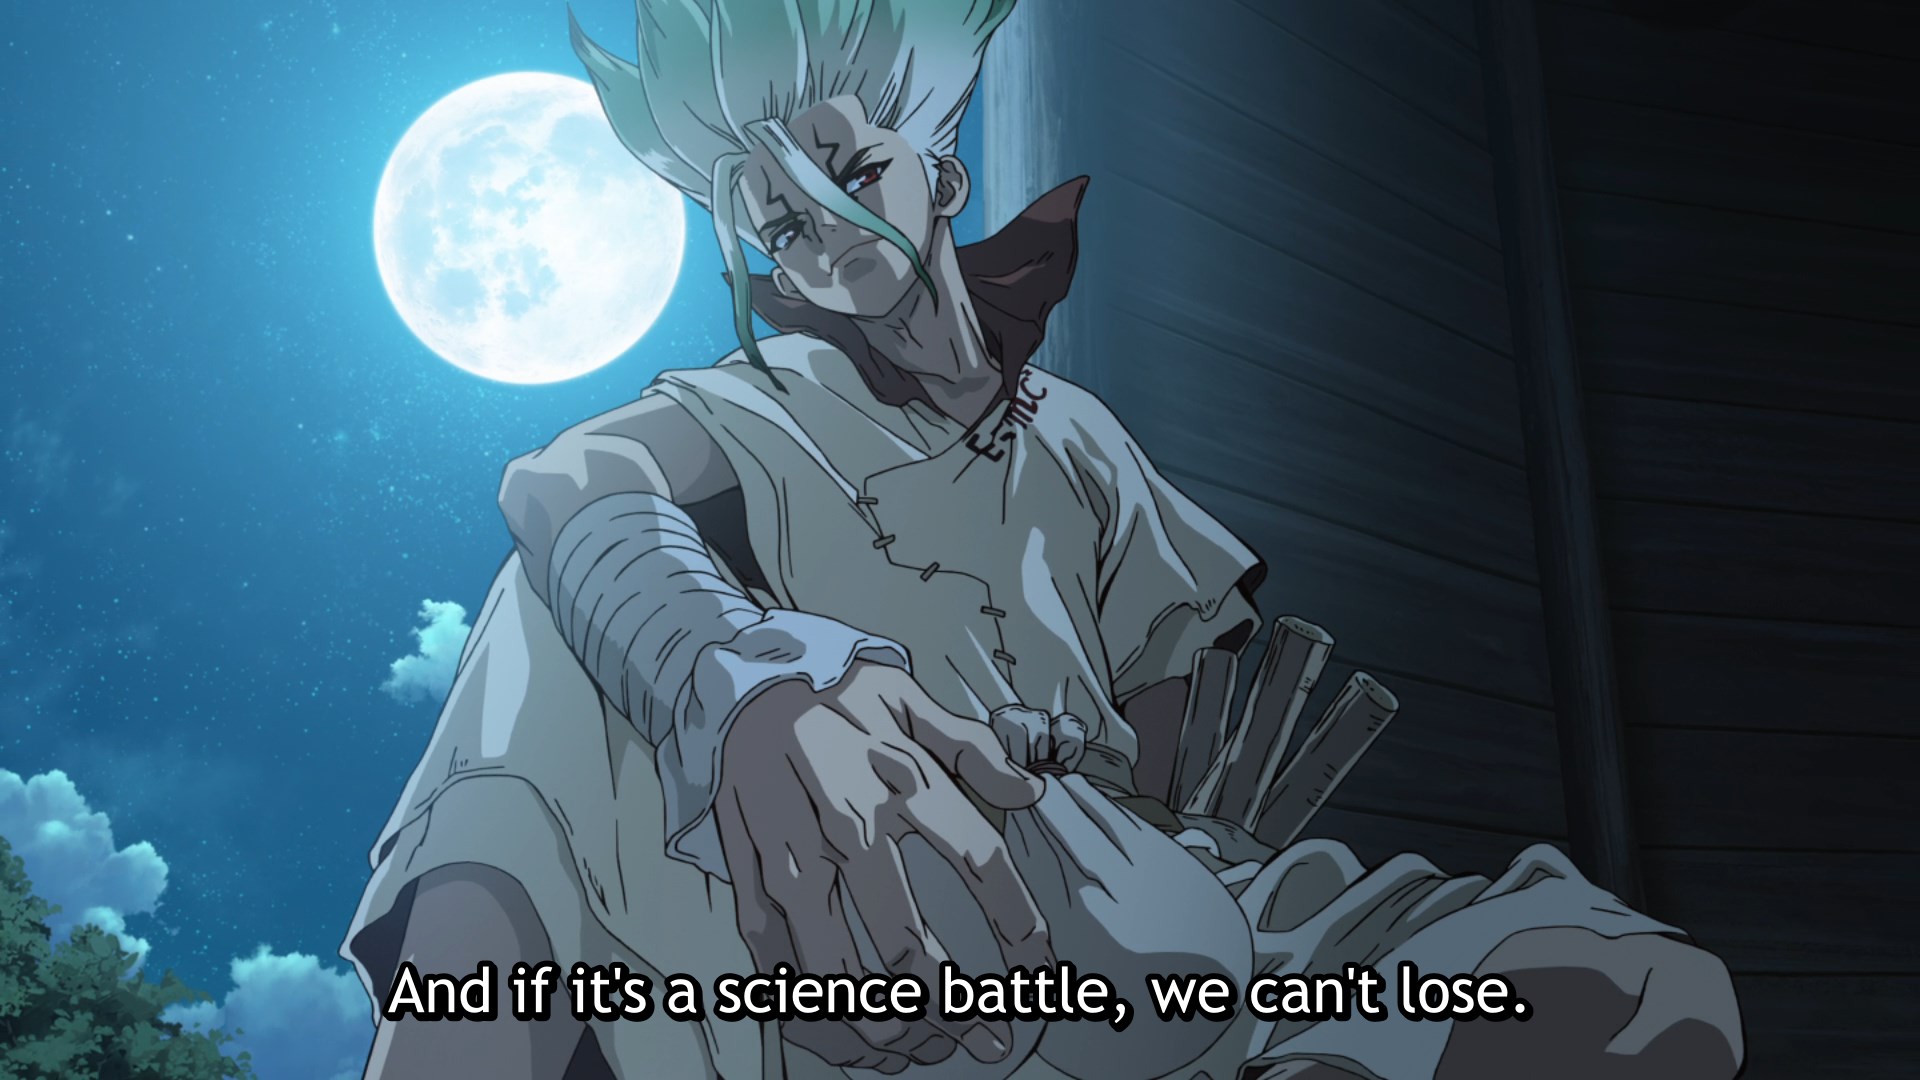 Dr. Stone: New World Episode 8 Review - I drink and watch anime